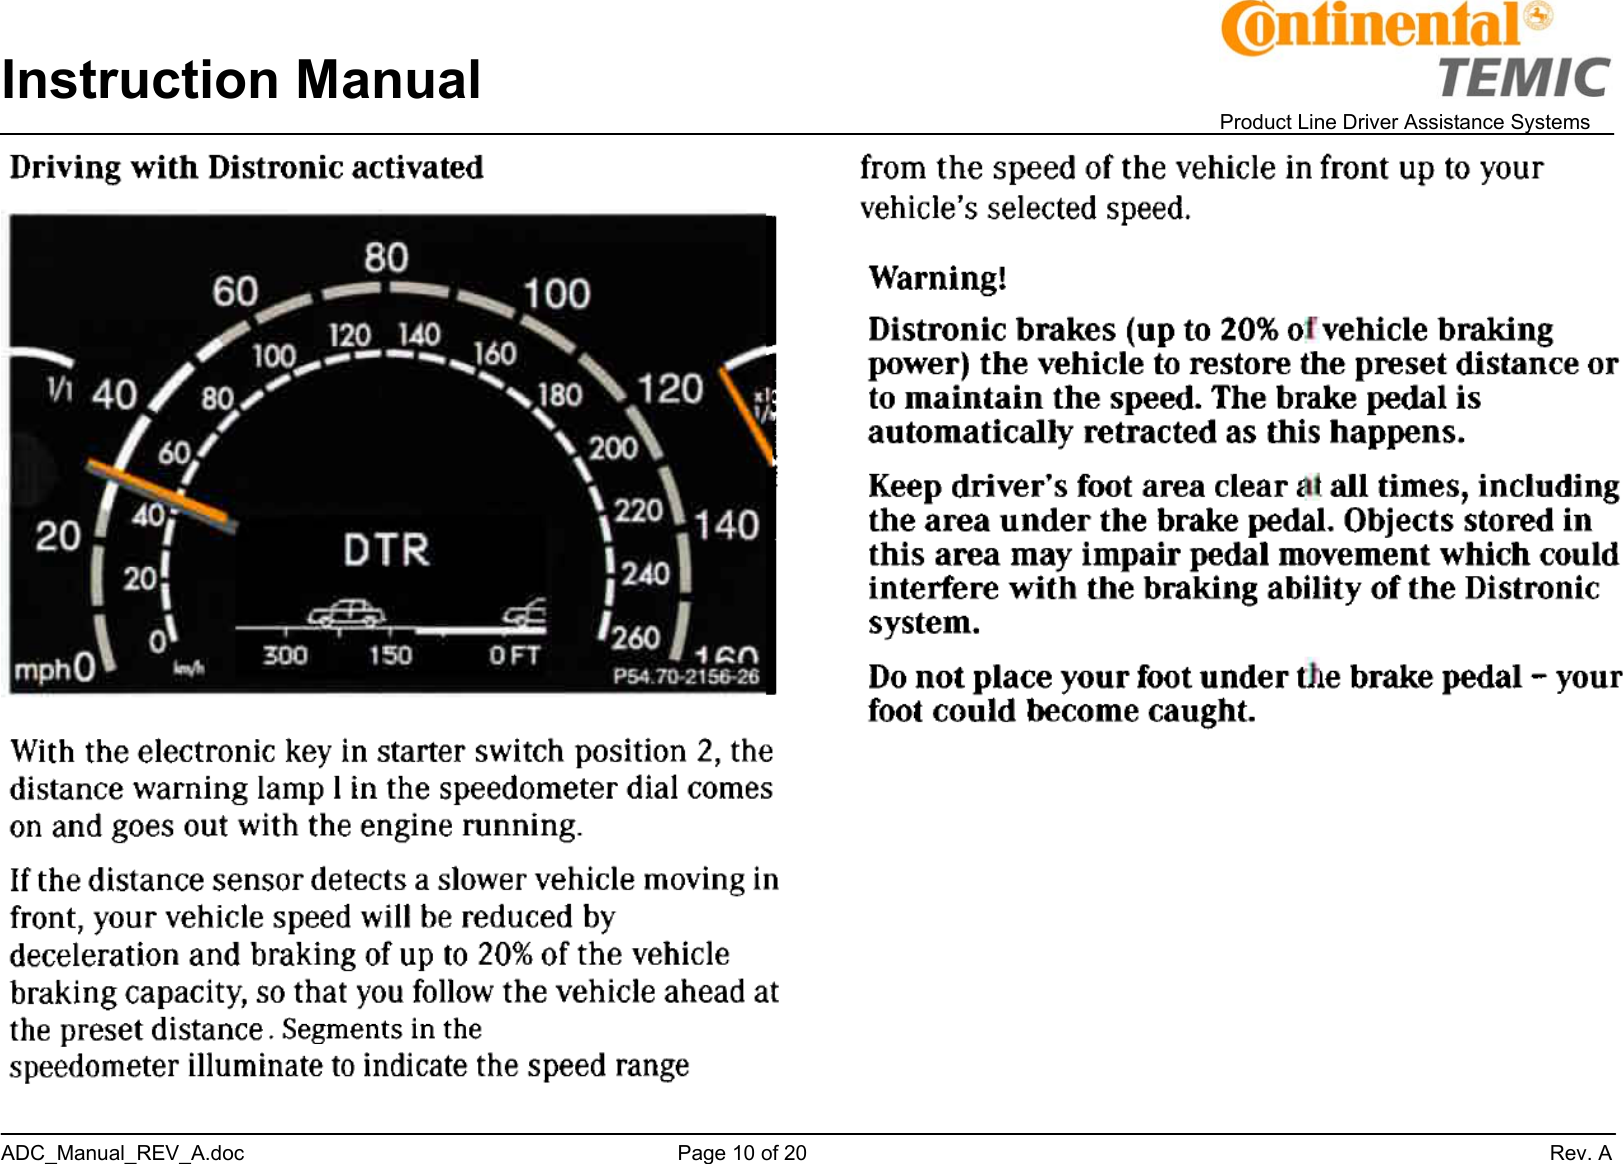 Instruction Manual    Product Line Driver Assistance Systems ADC_Manual_REV_A.doc     Page 10 of 20                 Rev. A       